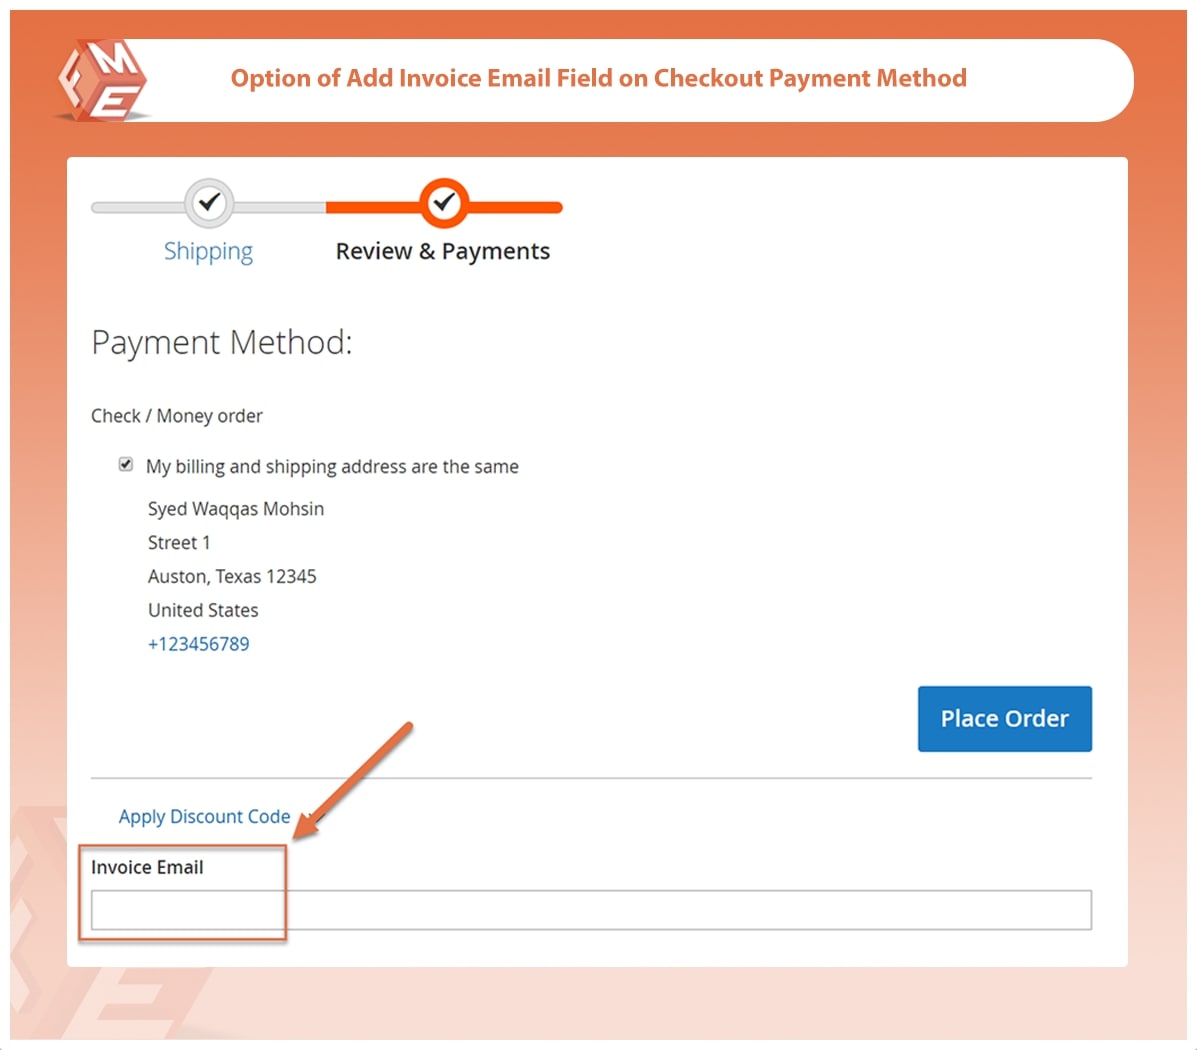 Invoice Email Field on Review & Payments Checkout Step